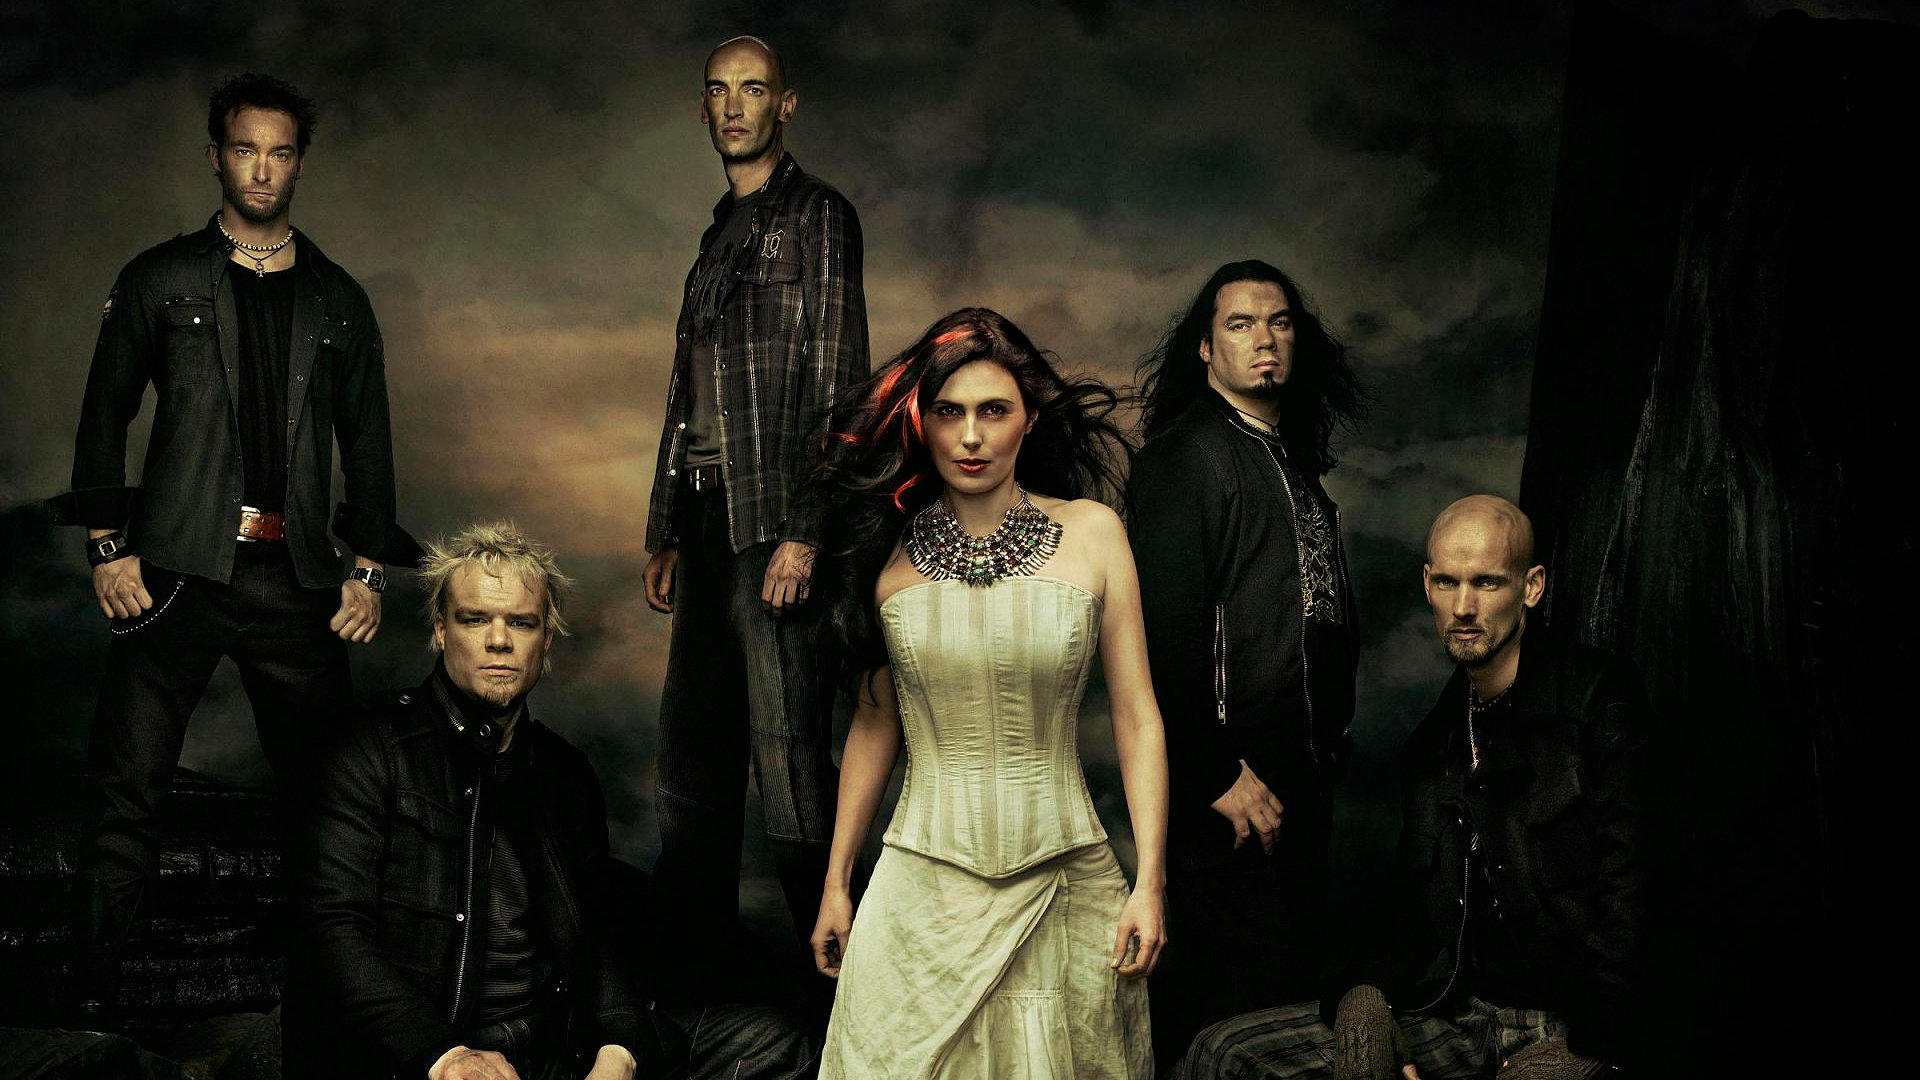 Best Within Temptation background ID:168961 for High Resolution full hd 1920x1080 computer